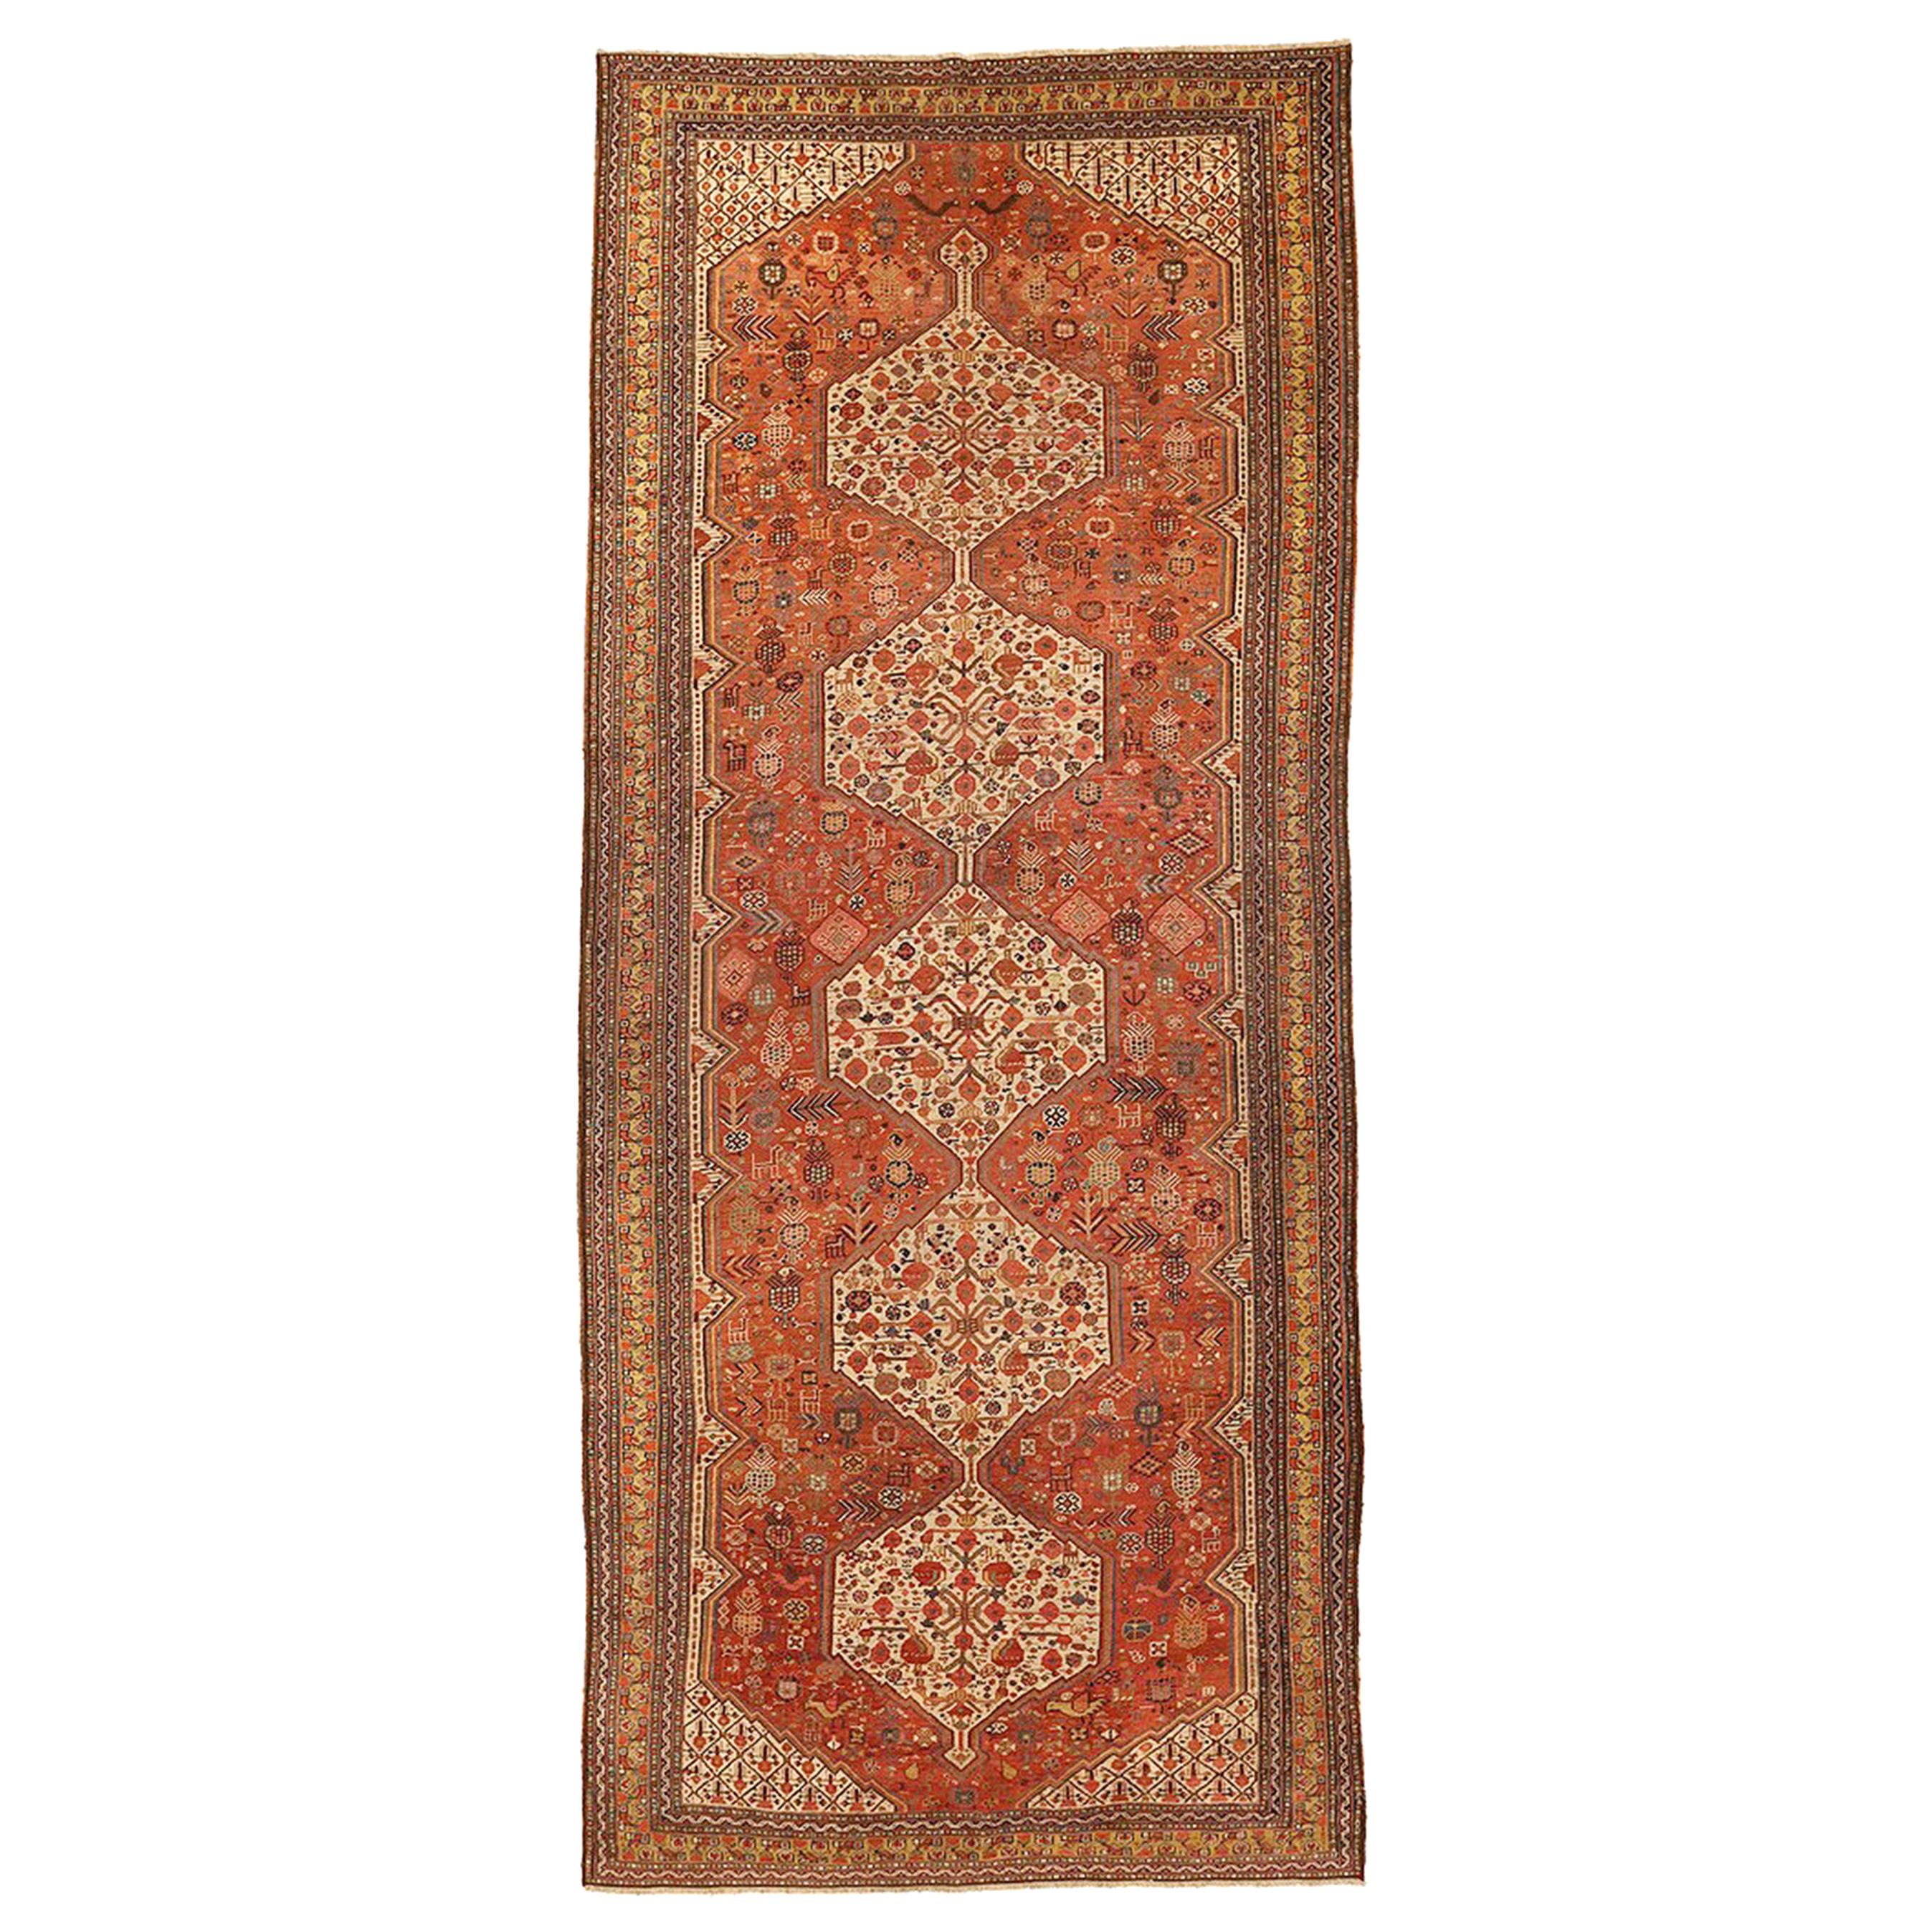 Antique Persian Shiraz Rug with Ivory Floral Medallions on Orange & Beige Field